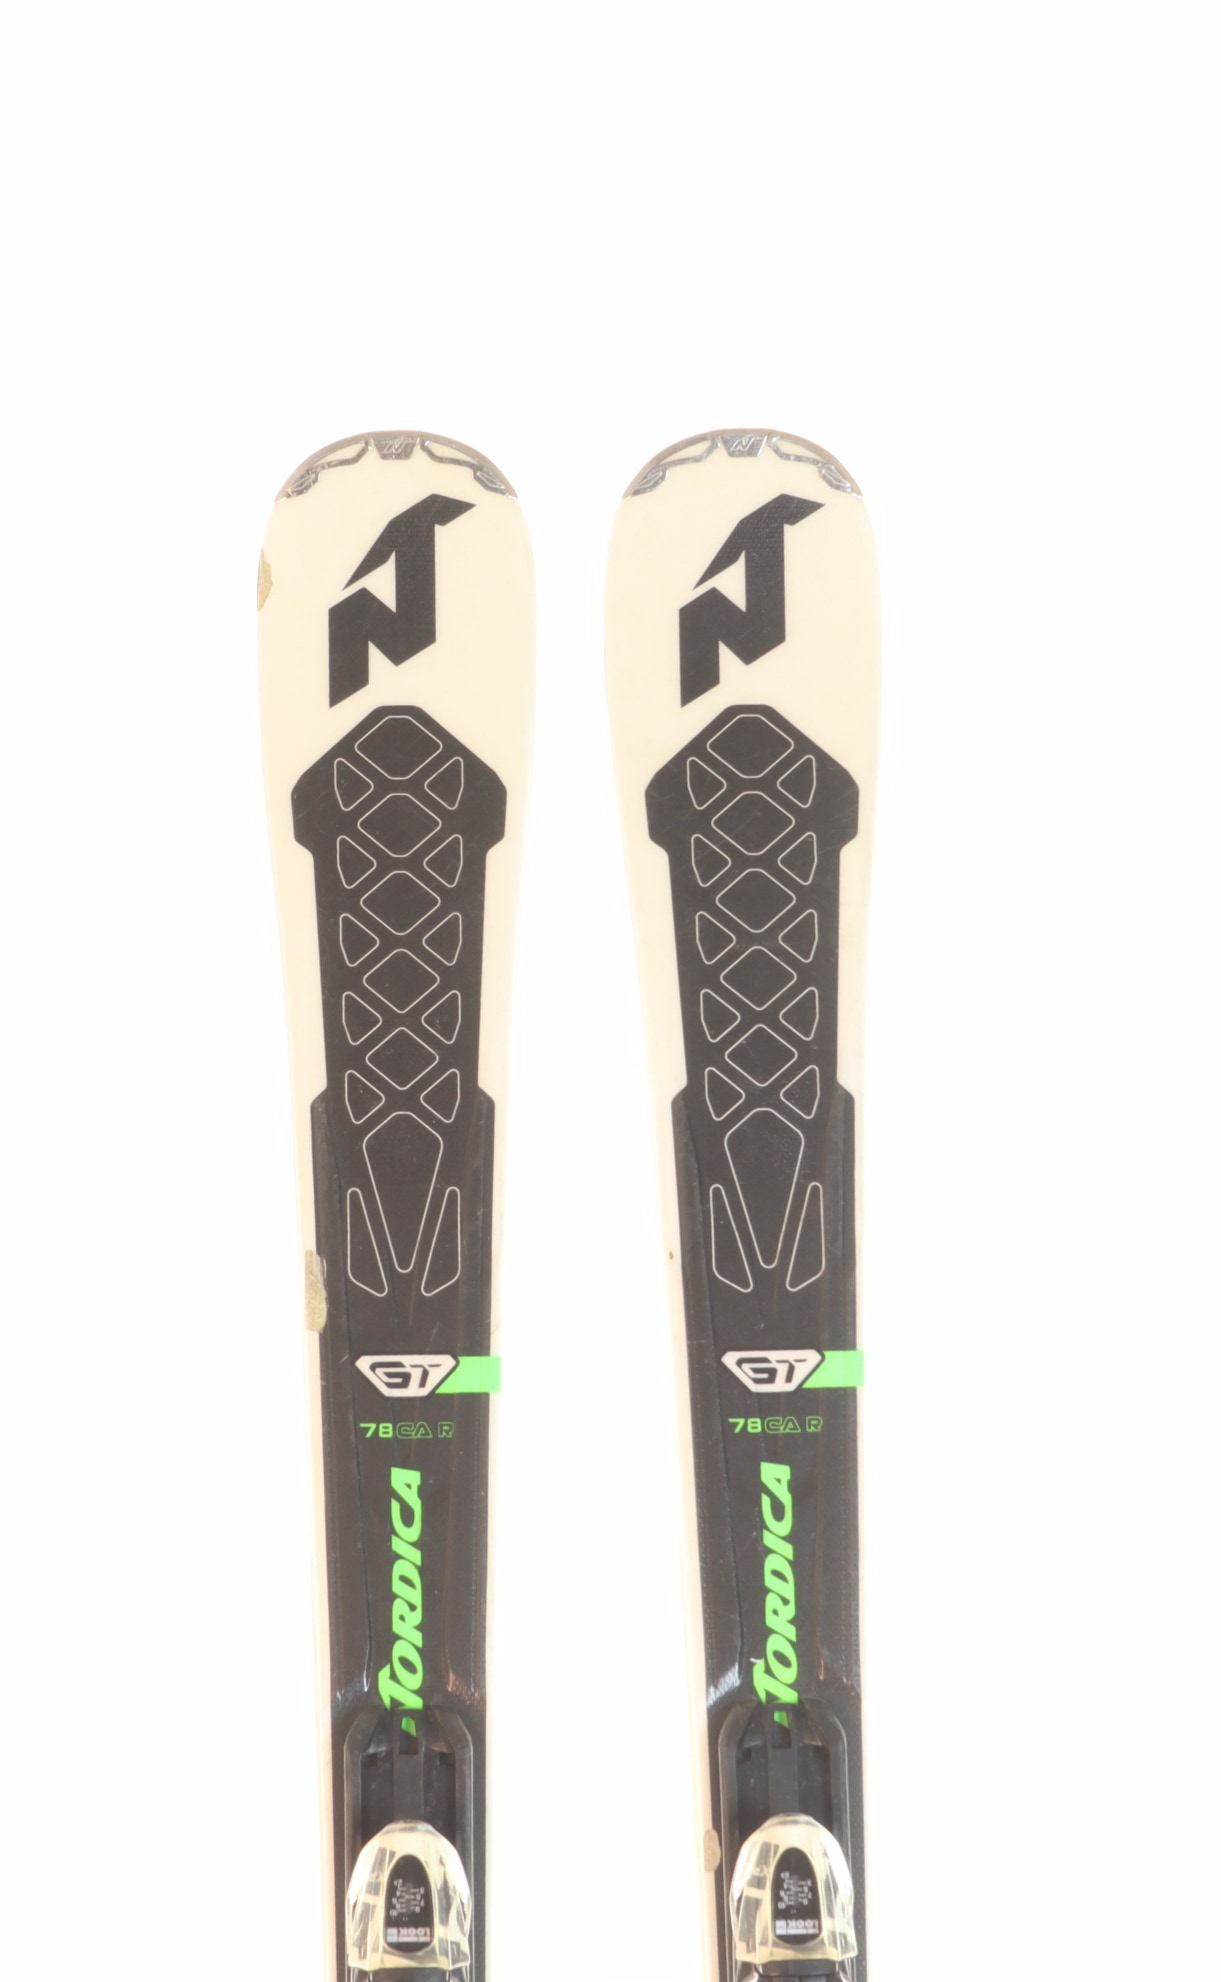 Used 2019 Nordica GT 78 R Skis With Look XPress 10 Bindings Size 152 (Option 230628)